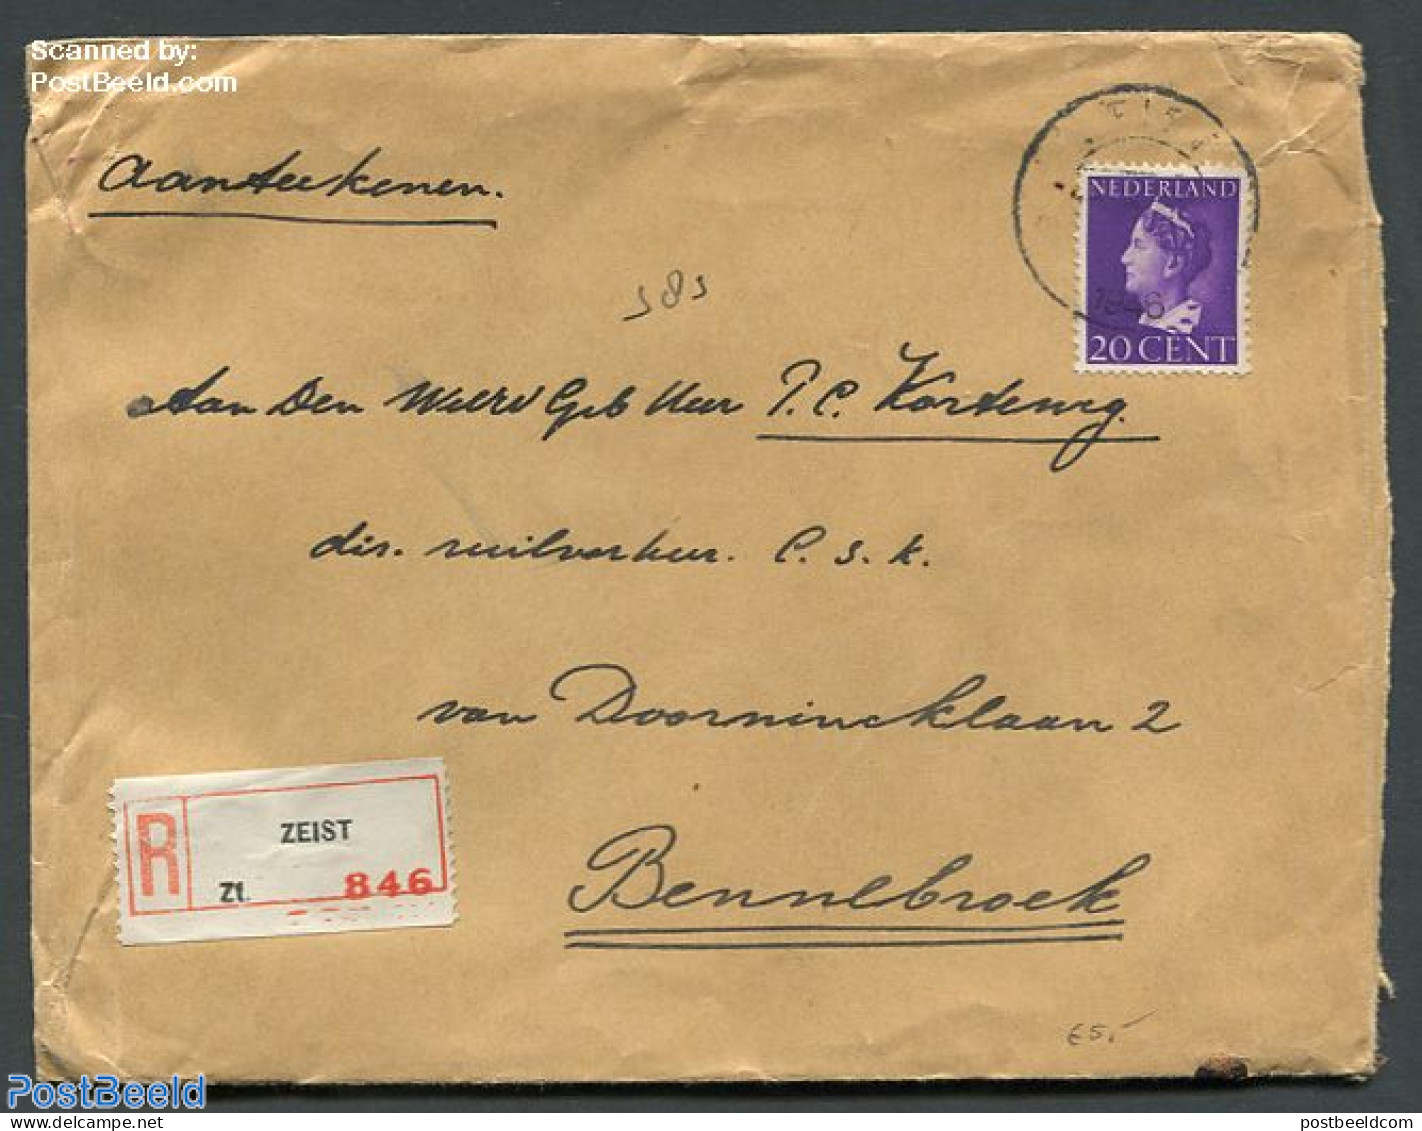 Netherlands 1940 Registered Cover From Zeist To Bennebroek, Postal History, History - Kings & Queens (Royalty) - Storia Postale